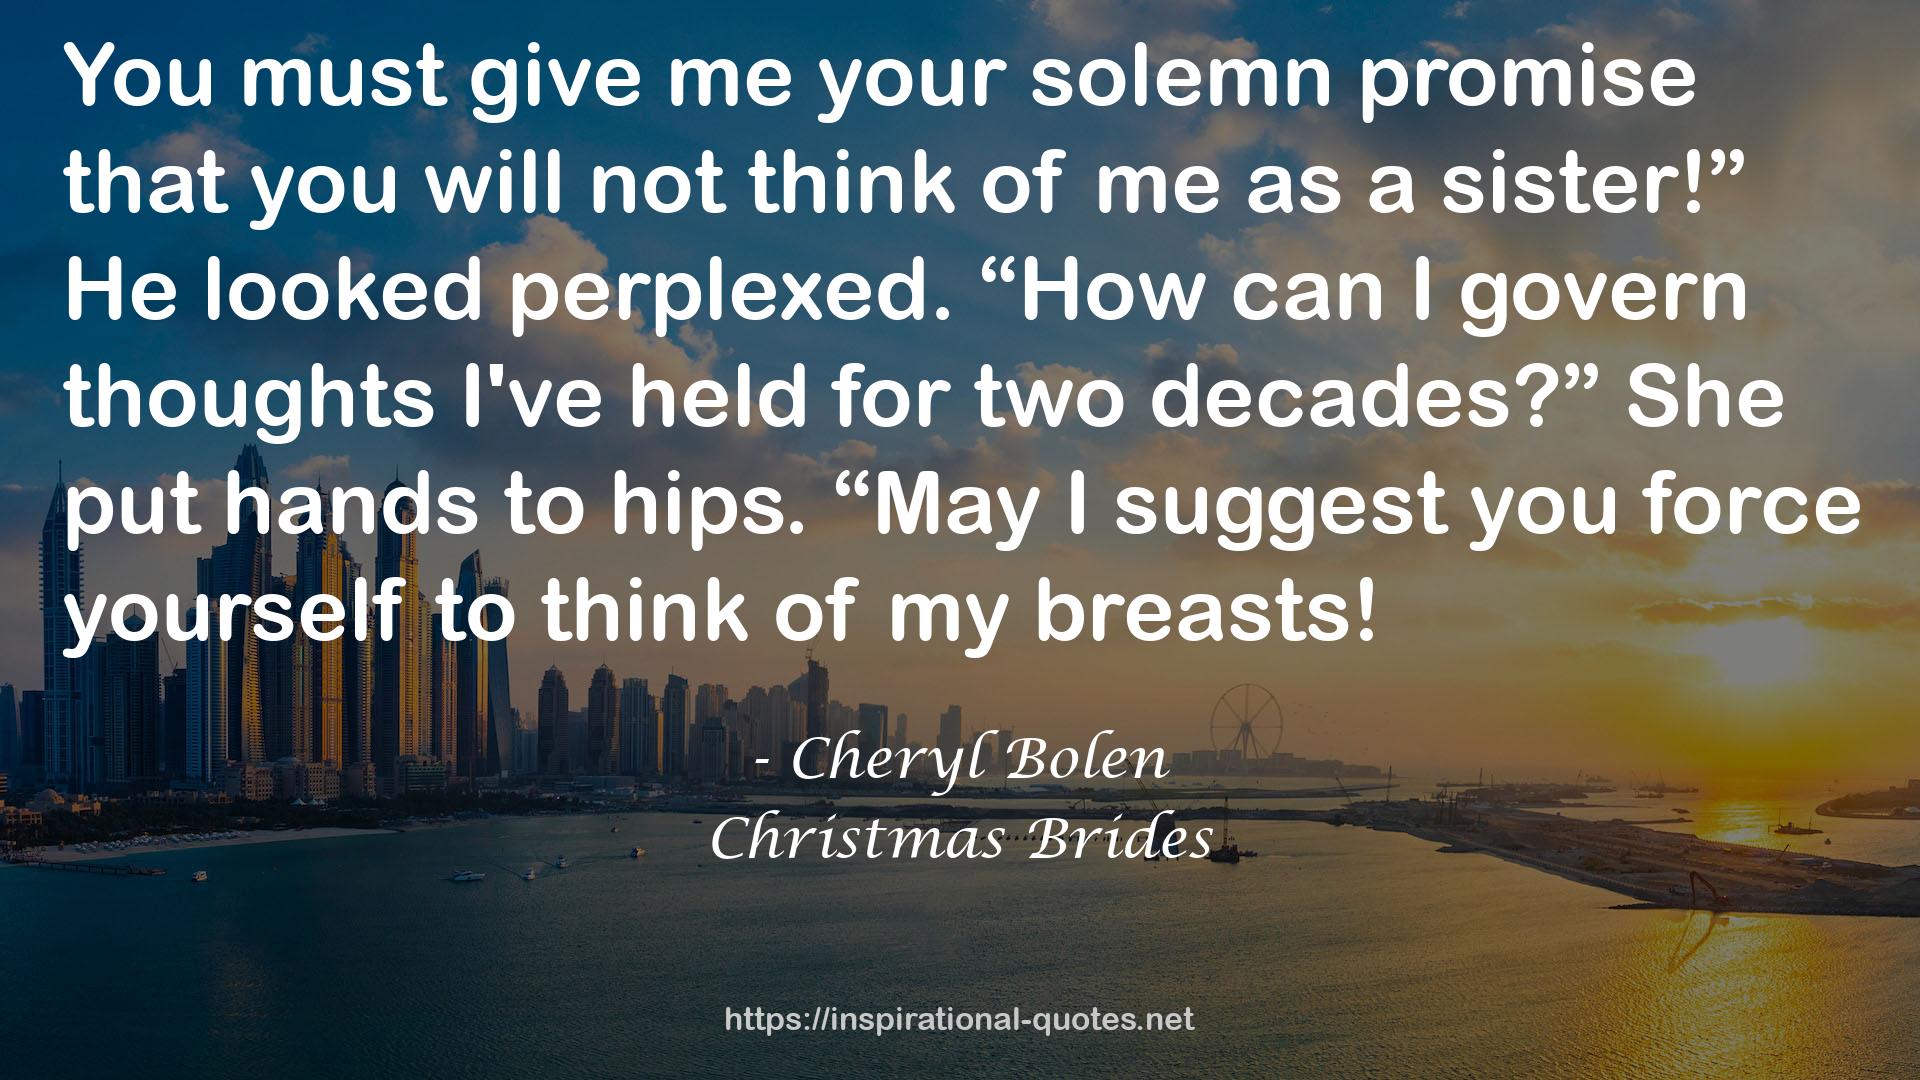 Christmas Brides QUOTES